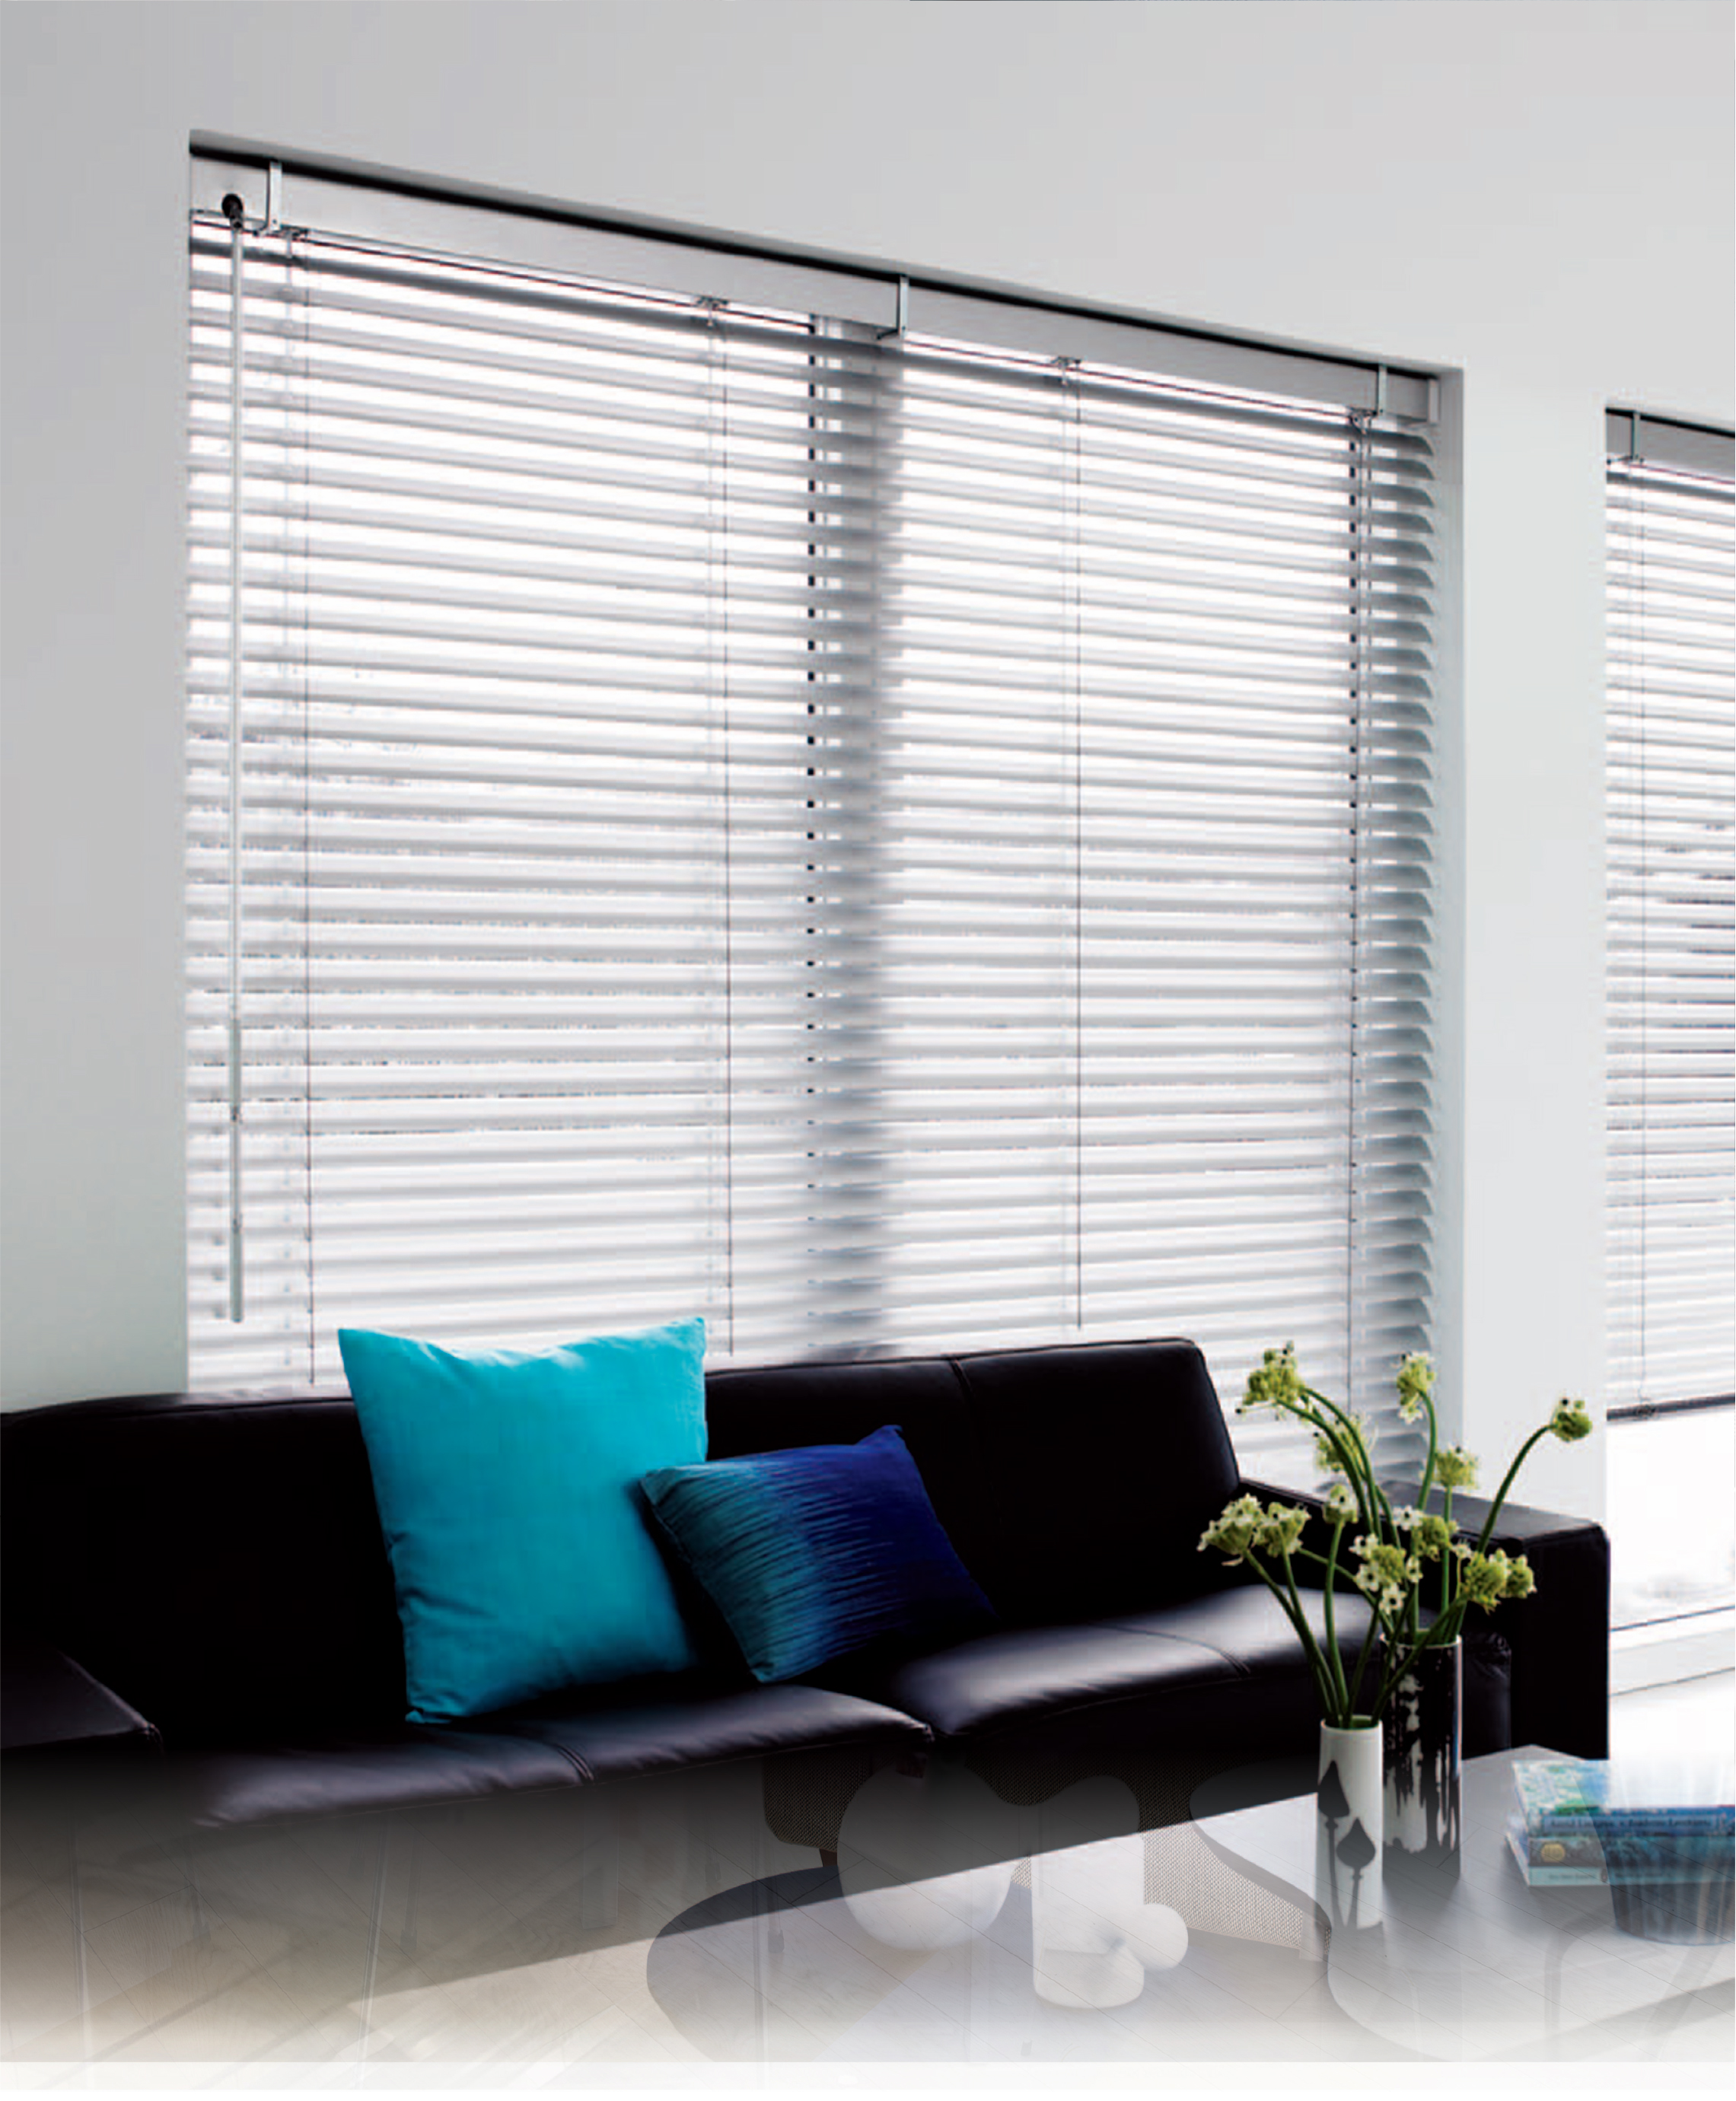 How can you style your room decor with wooden blinds?